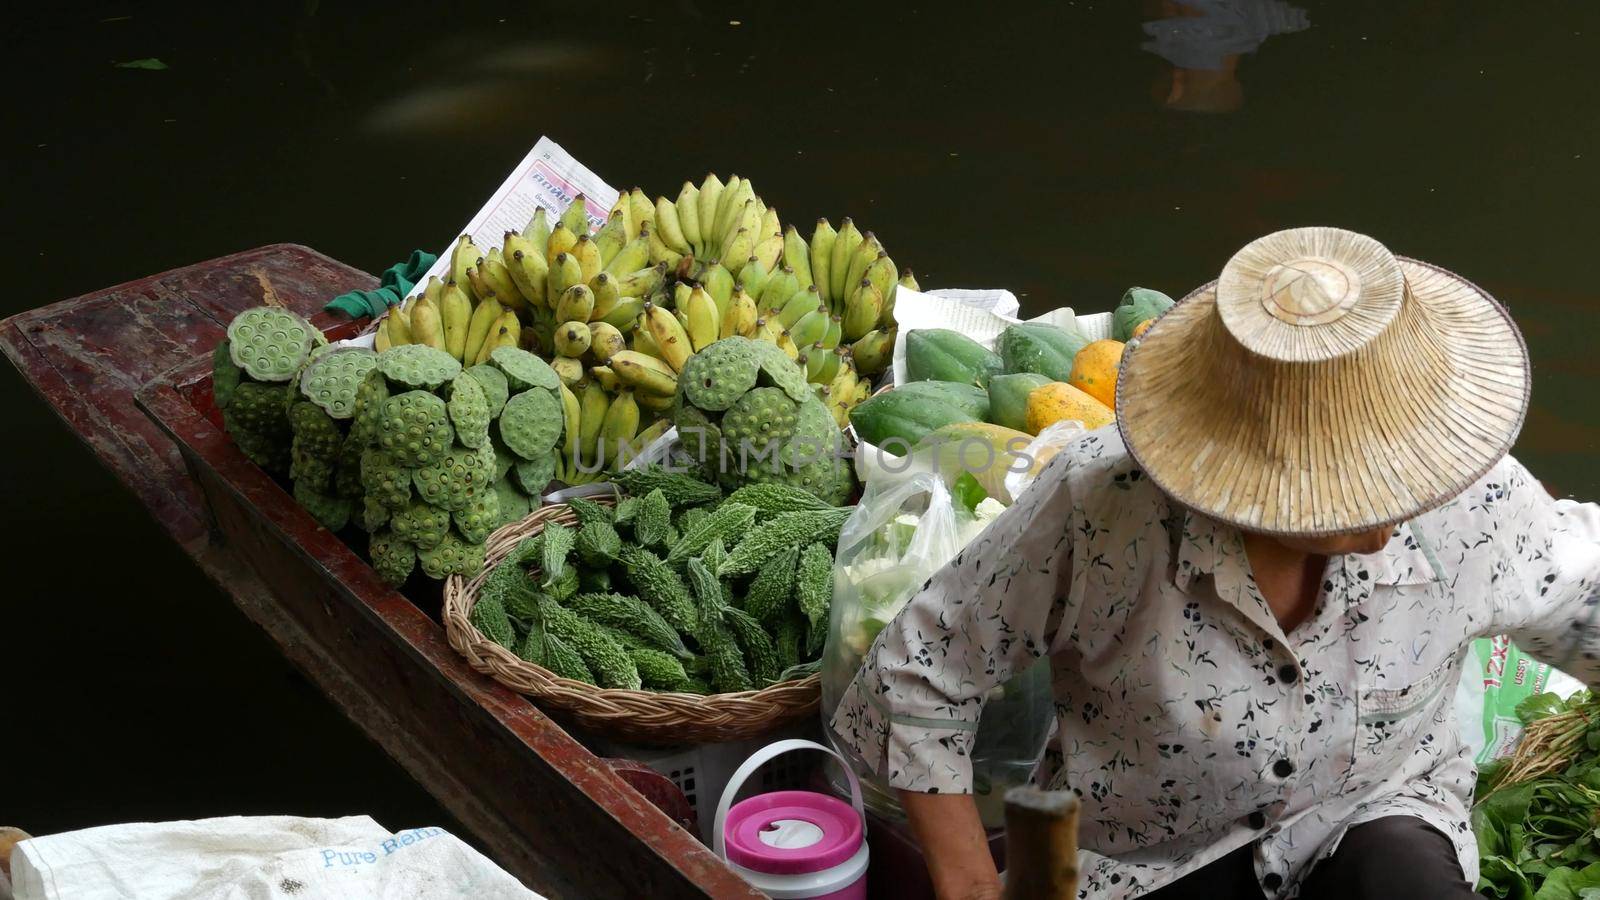 BANGKOK, THAILAND - 13 JULY 2019: Lat Mayom floating market. Traditional classic khlong river canal, local women farmers, long-tail boats with fruits and vegetables. Iconic asian street food selling. by DogoraSun